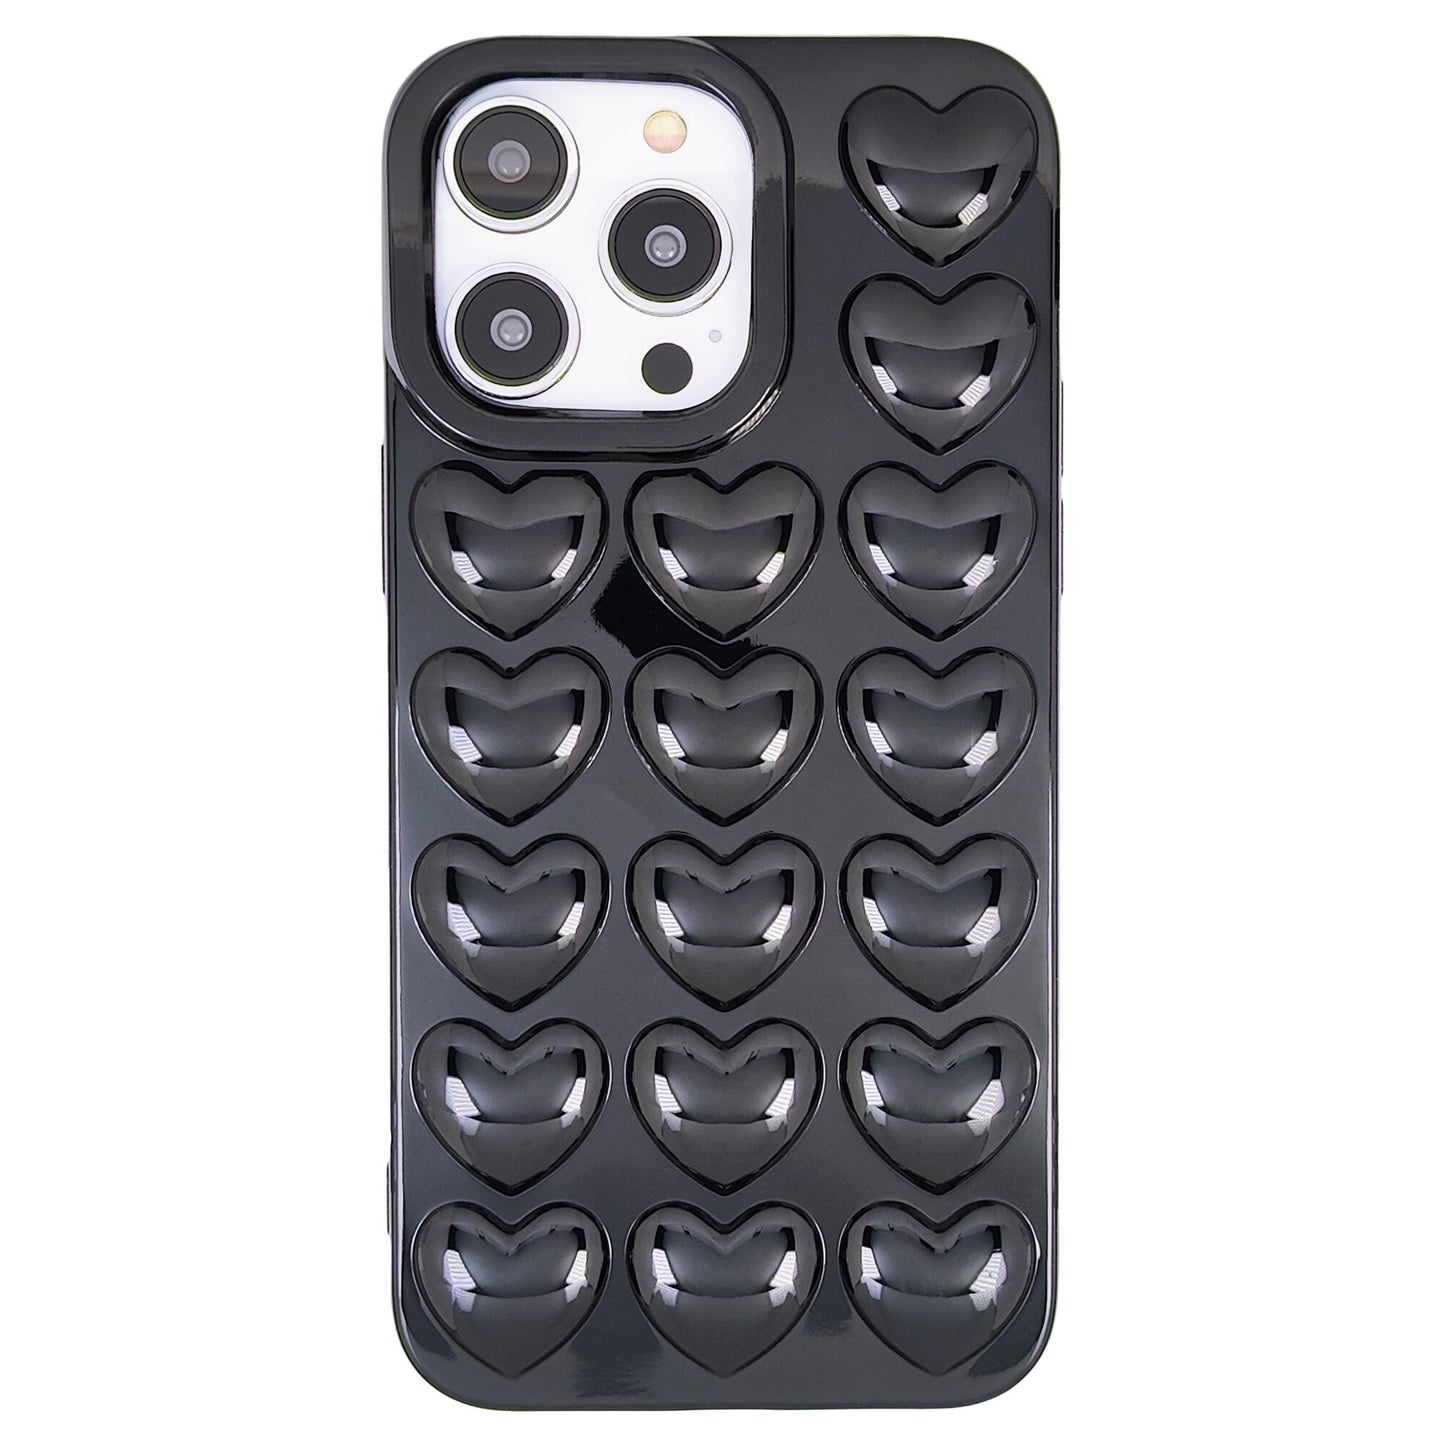 for iPhone 14 13 Pro Max Plus Mini Case 3D Bubble Pop Heart Super Cute Girly for Women Soft Cover Baby Pink Lavender Black Clear - For iPhone 14Pro Max / Black / China - For iPhone 14 Pro / Black / China - For iPhone 14 Plus / Black / China - For iPhone 14 / Black / China - For iPhone 13Pro Max / Black / China - For iPhone 13 Pro / Black / China - For iPhone 13 / Black / China - For iPhone 13 Mini / Black / China - For iPhone 14Pro Max / Black / United States - For iPhone 14 Pro / Black / Uni...